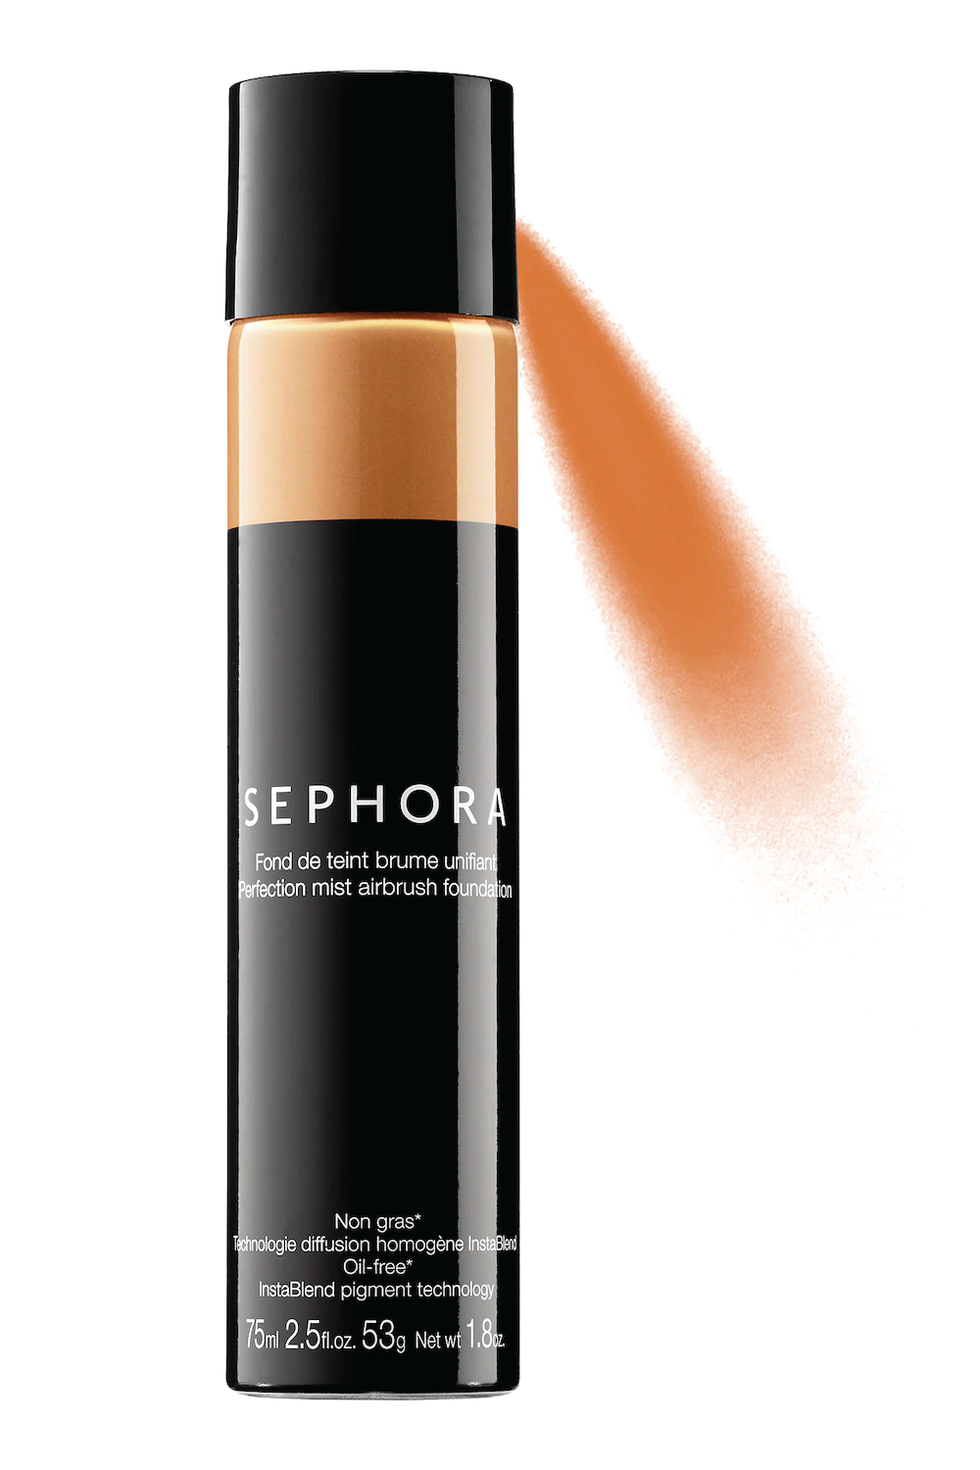 This *$20 AIRBRUSH FOUNDATION* is said to be the Best Foundation Ever!!